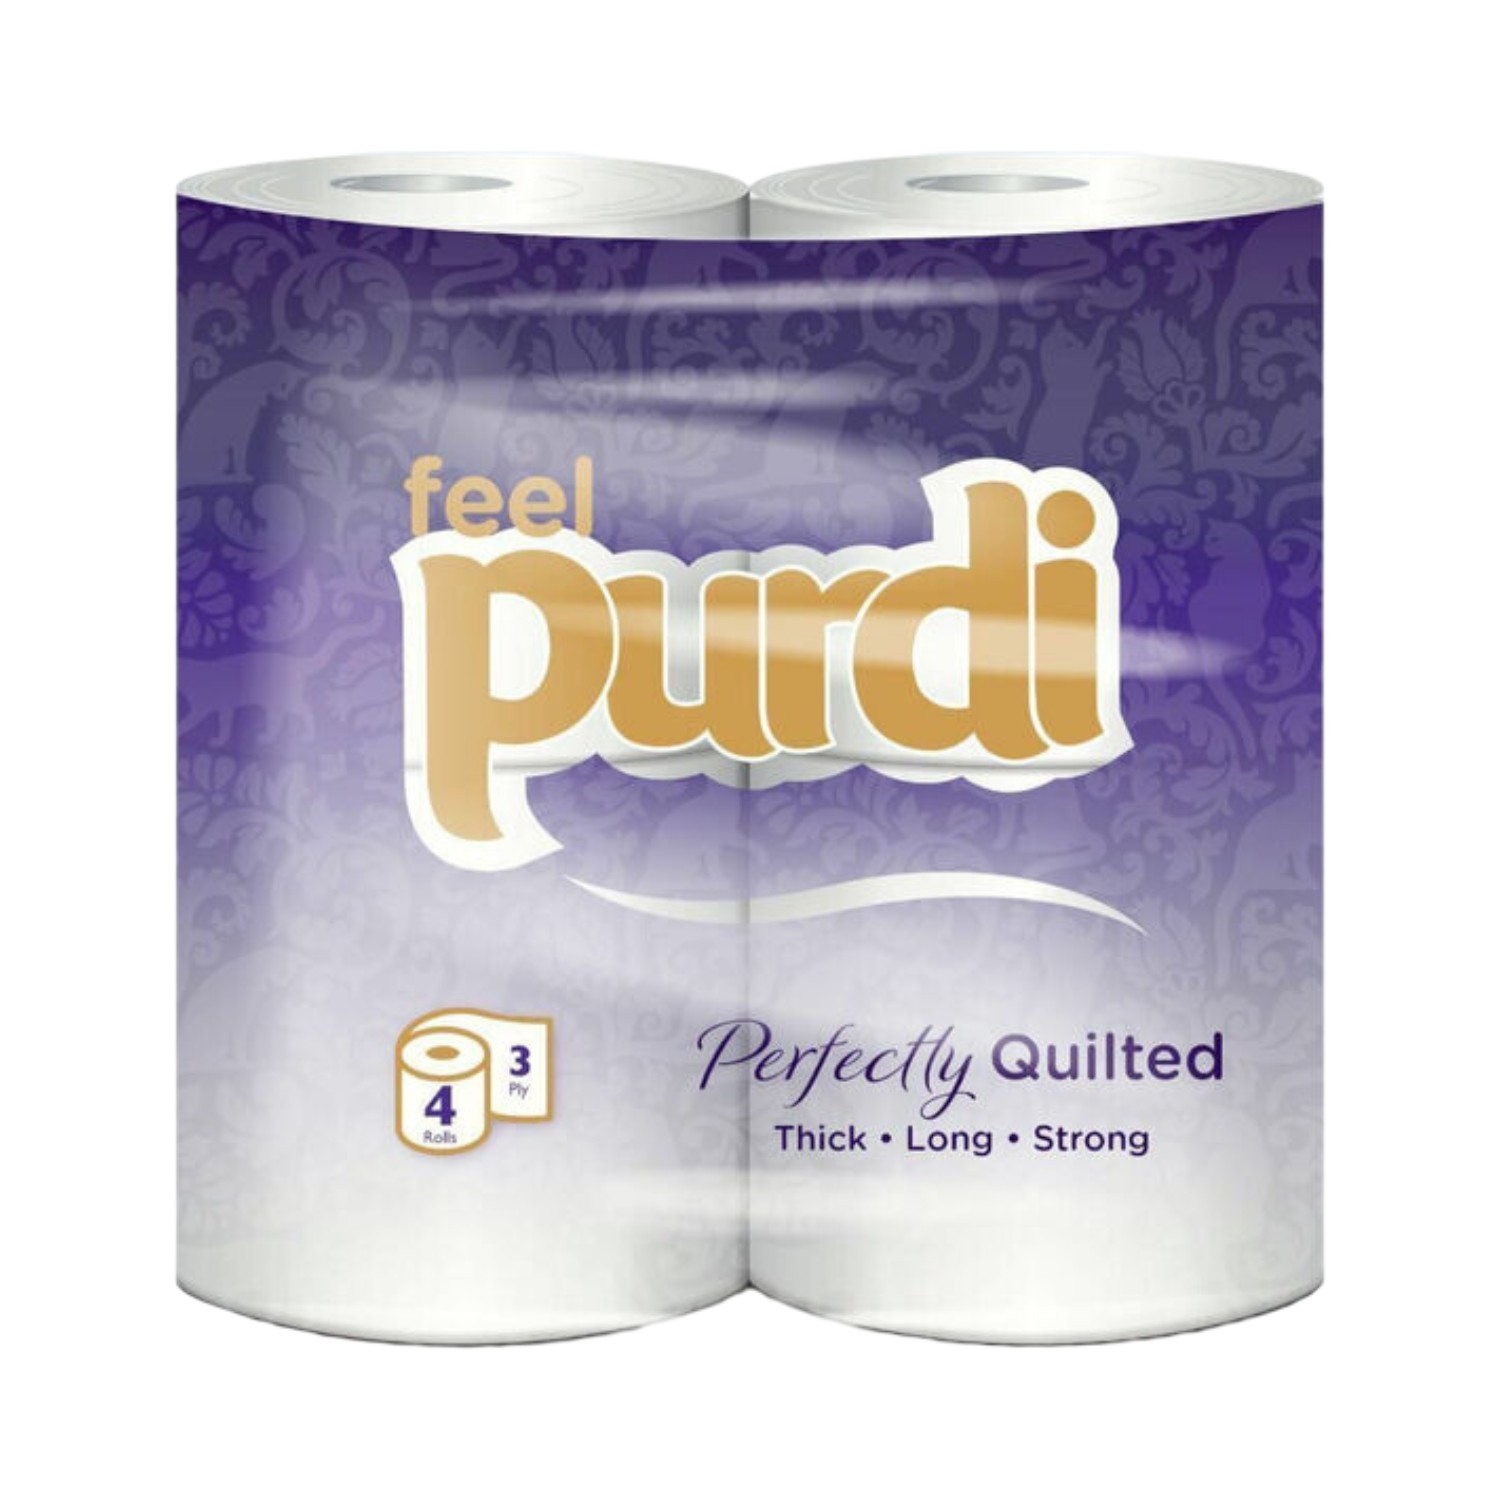 Purdi+Perfectly+Quilted+3+Ply+Toilet+Tissue+Rolls